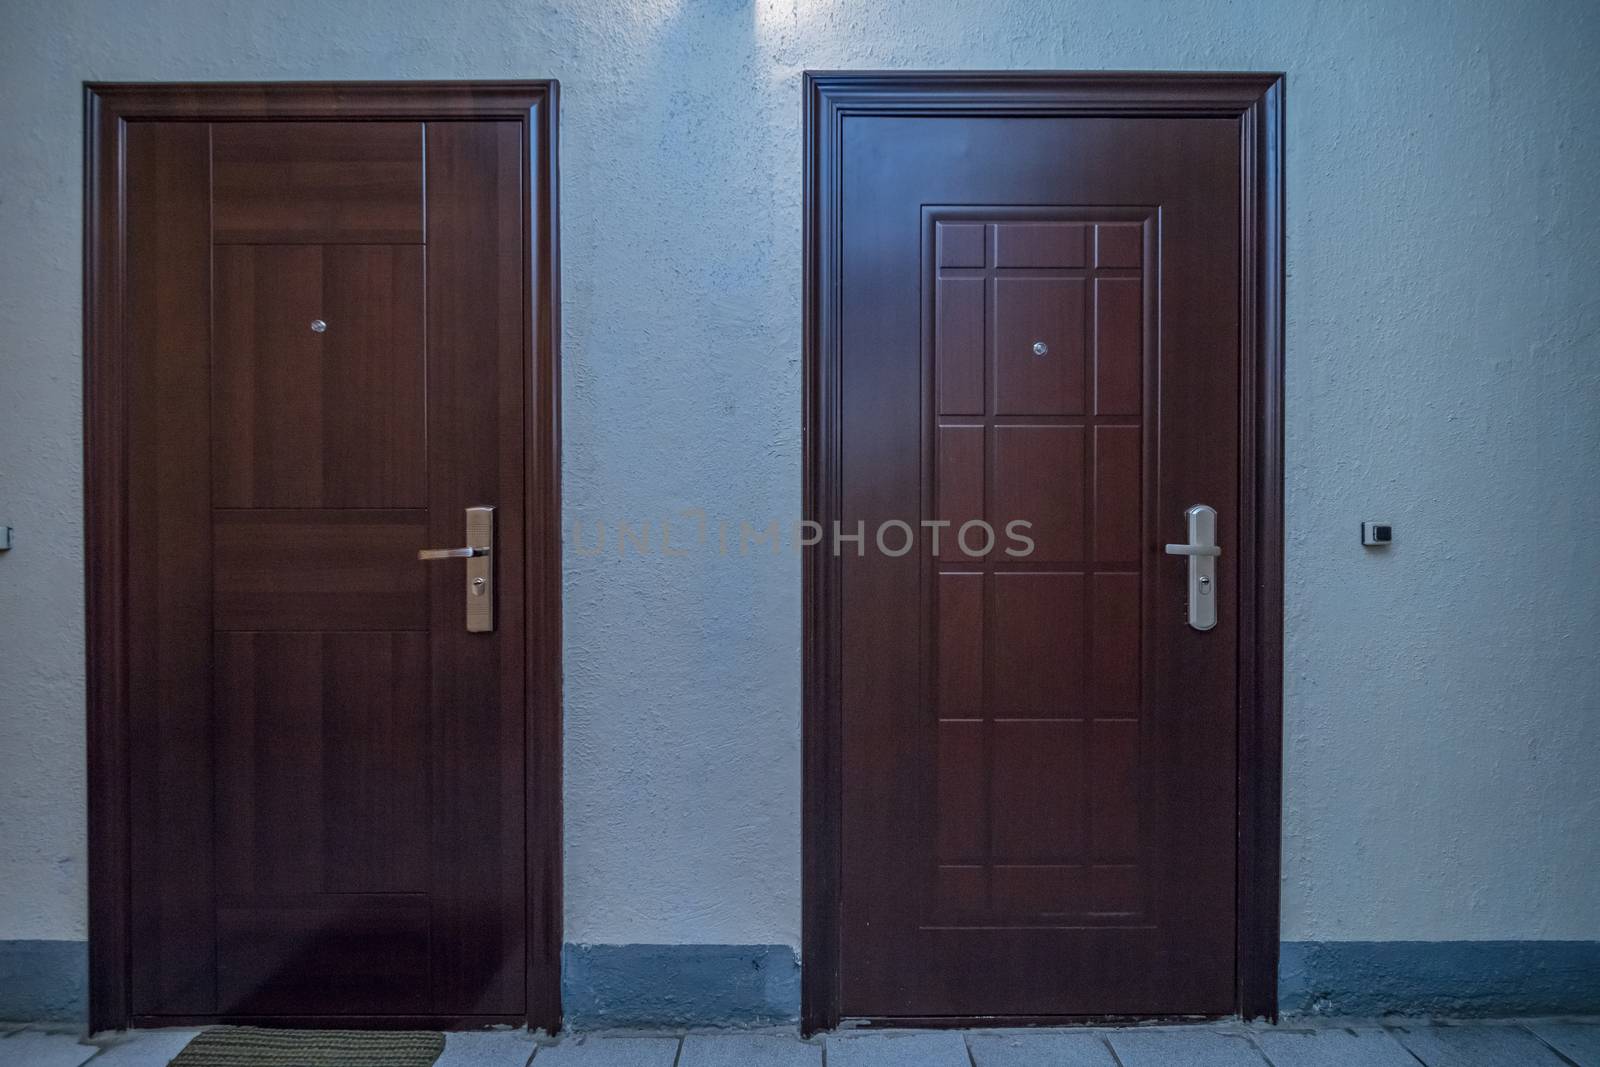 Residential building apartment doors entrance with door bell